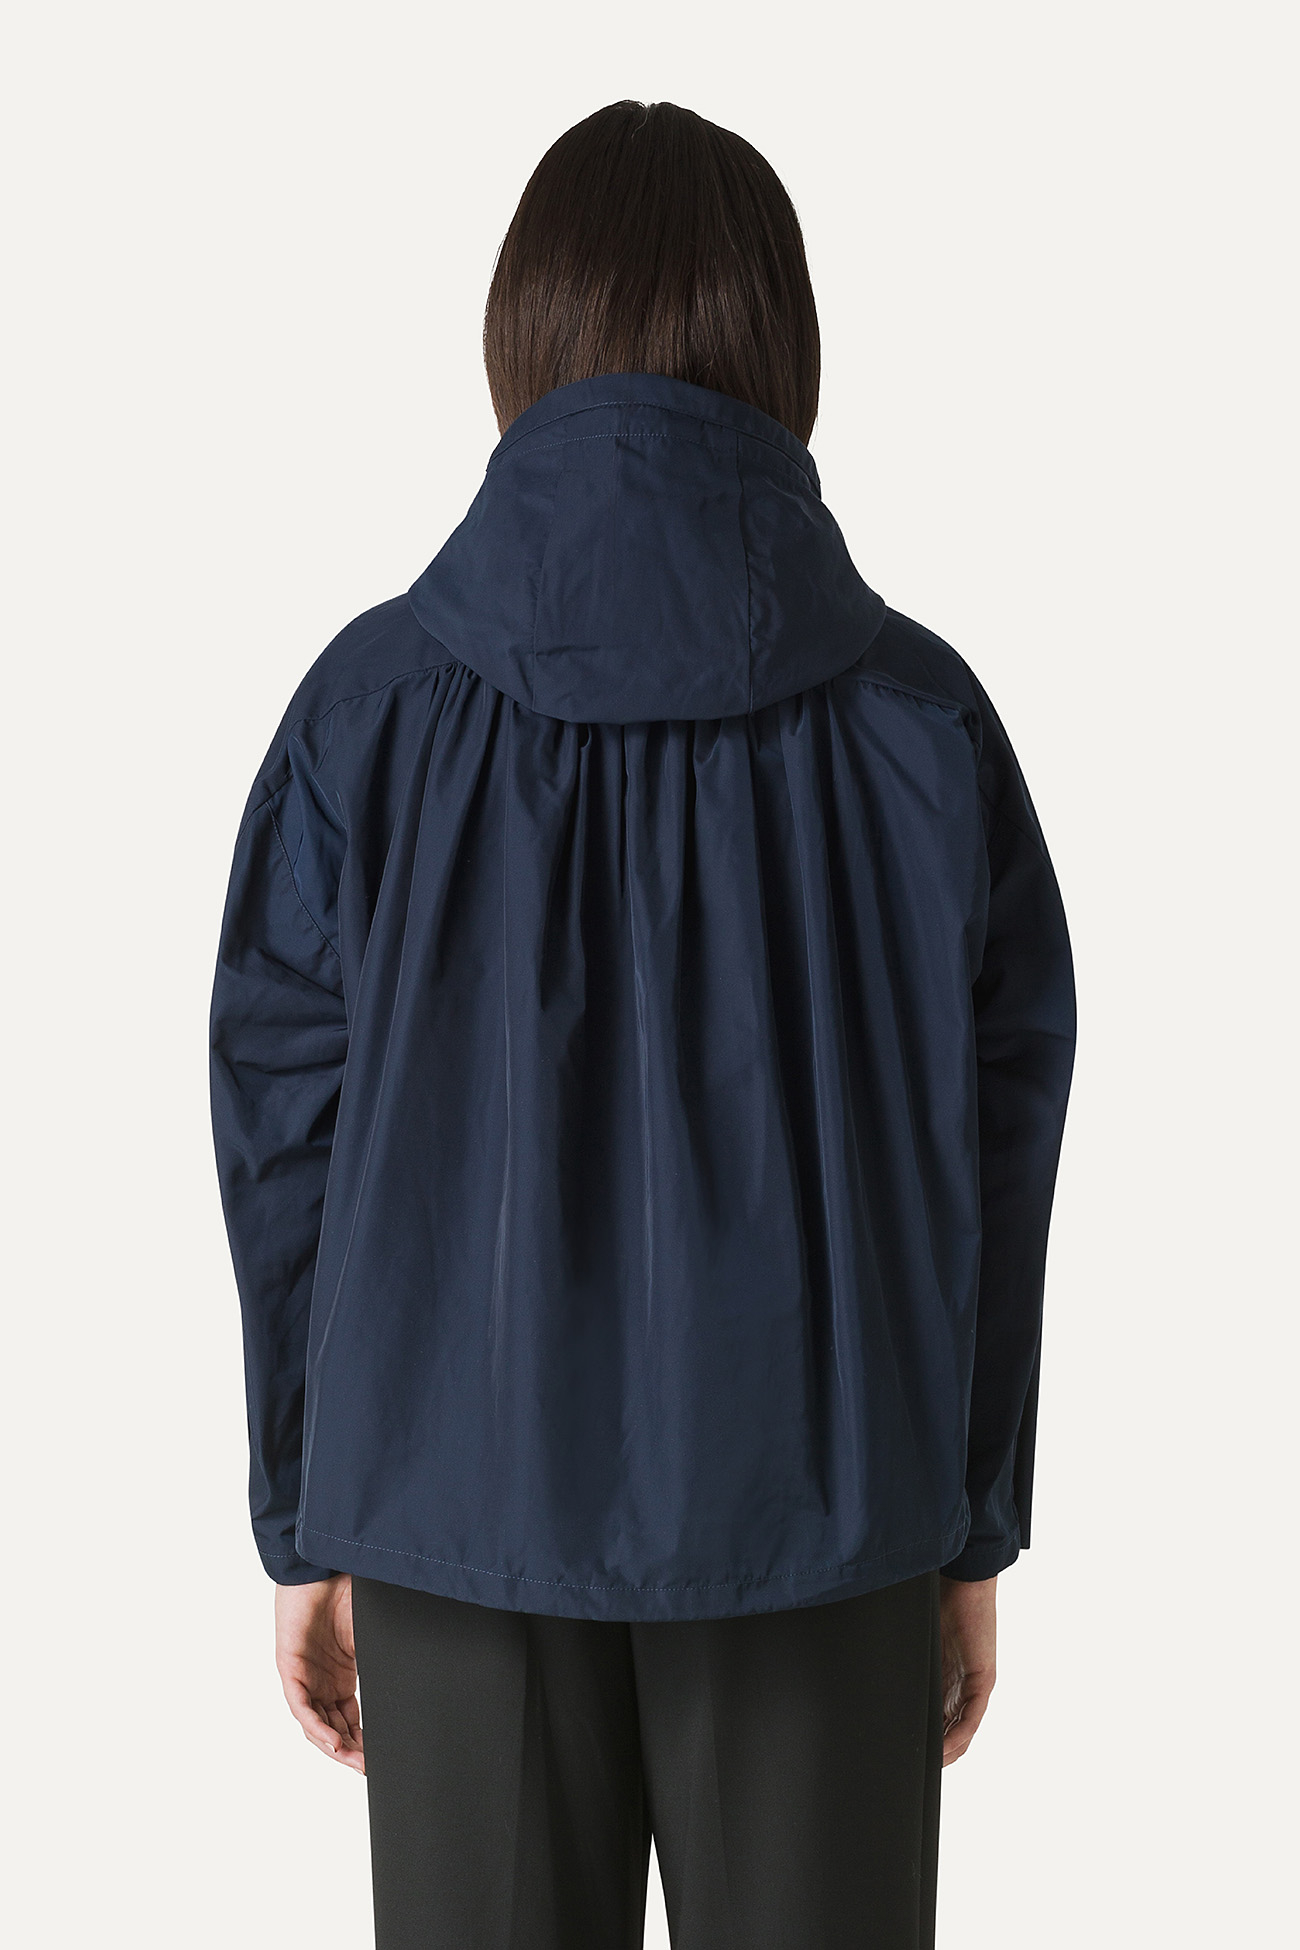 SHORT JACKET IN MEMORY NYLON WITH GATHERED BACK 9139 - MIDNIGHT BLUE - OOF WEAR